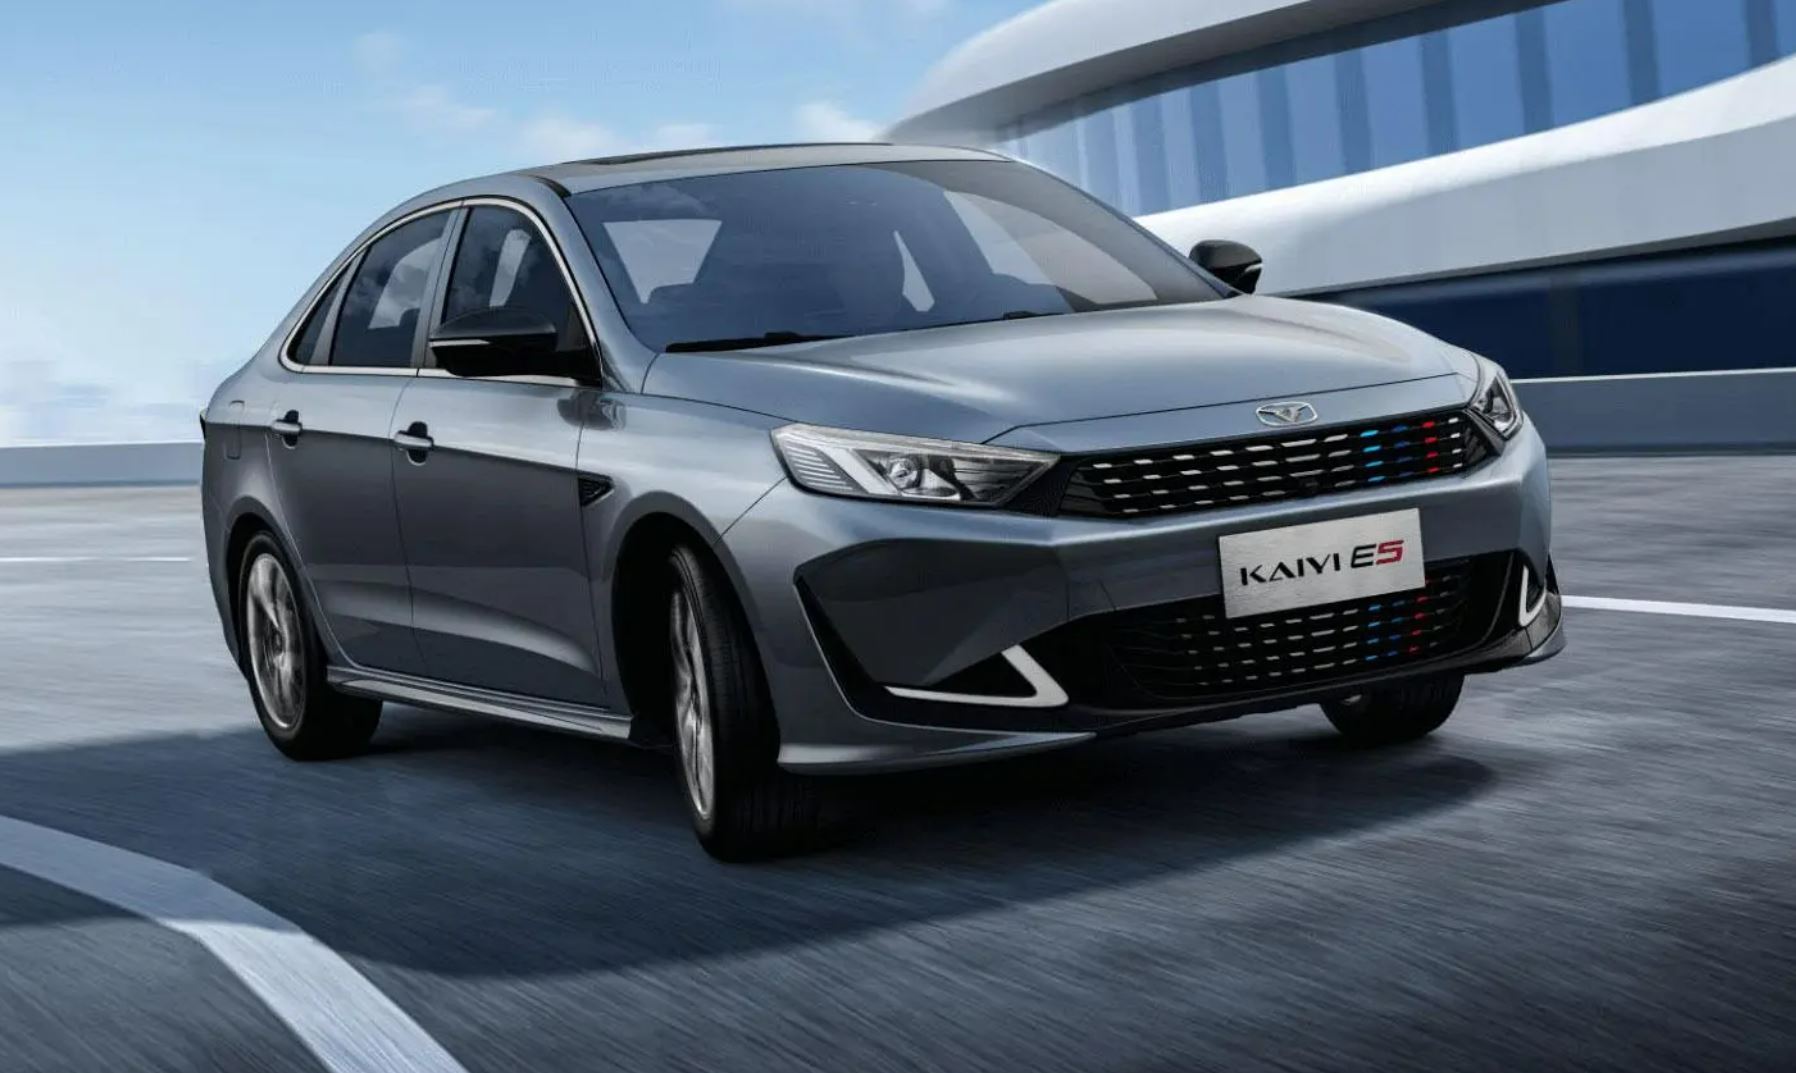 A serious bid for success: the mid-size 147-horsepower Kaiyi E5 sedan with a CVT will be only slightly more expensive than the Lada Granta